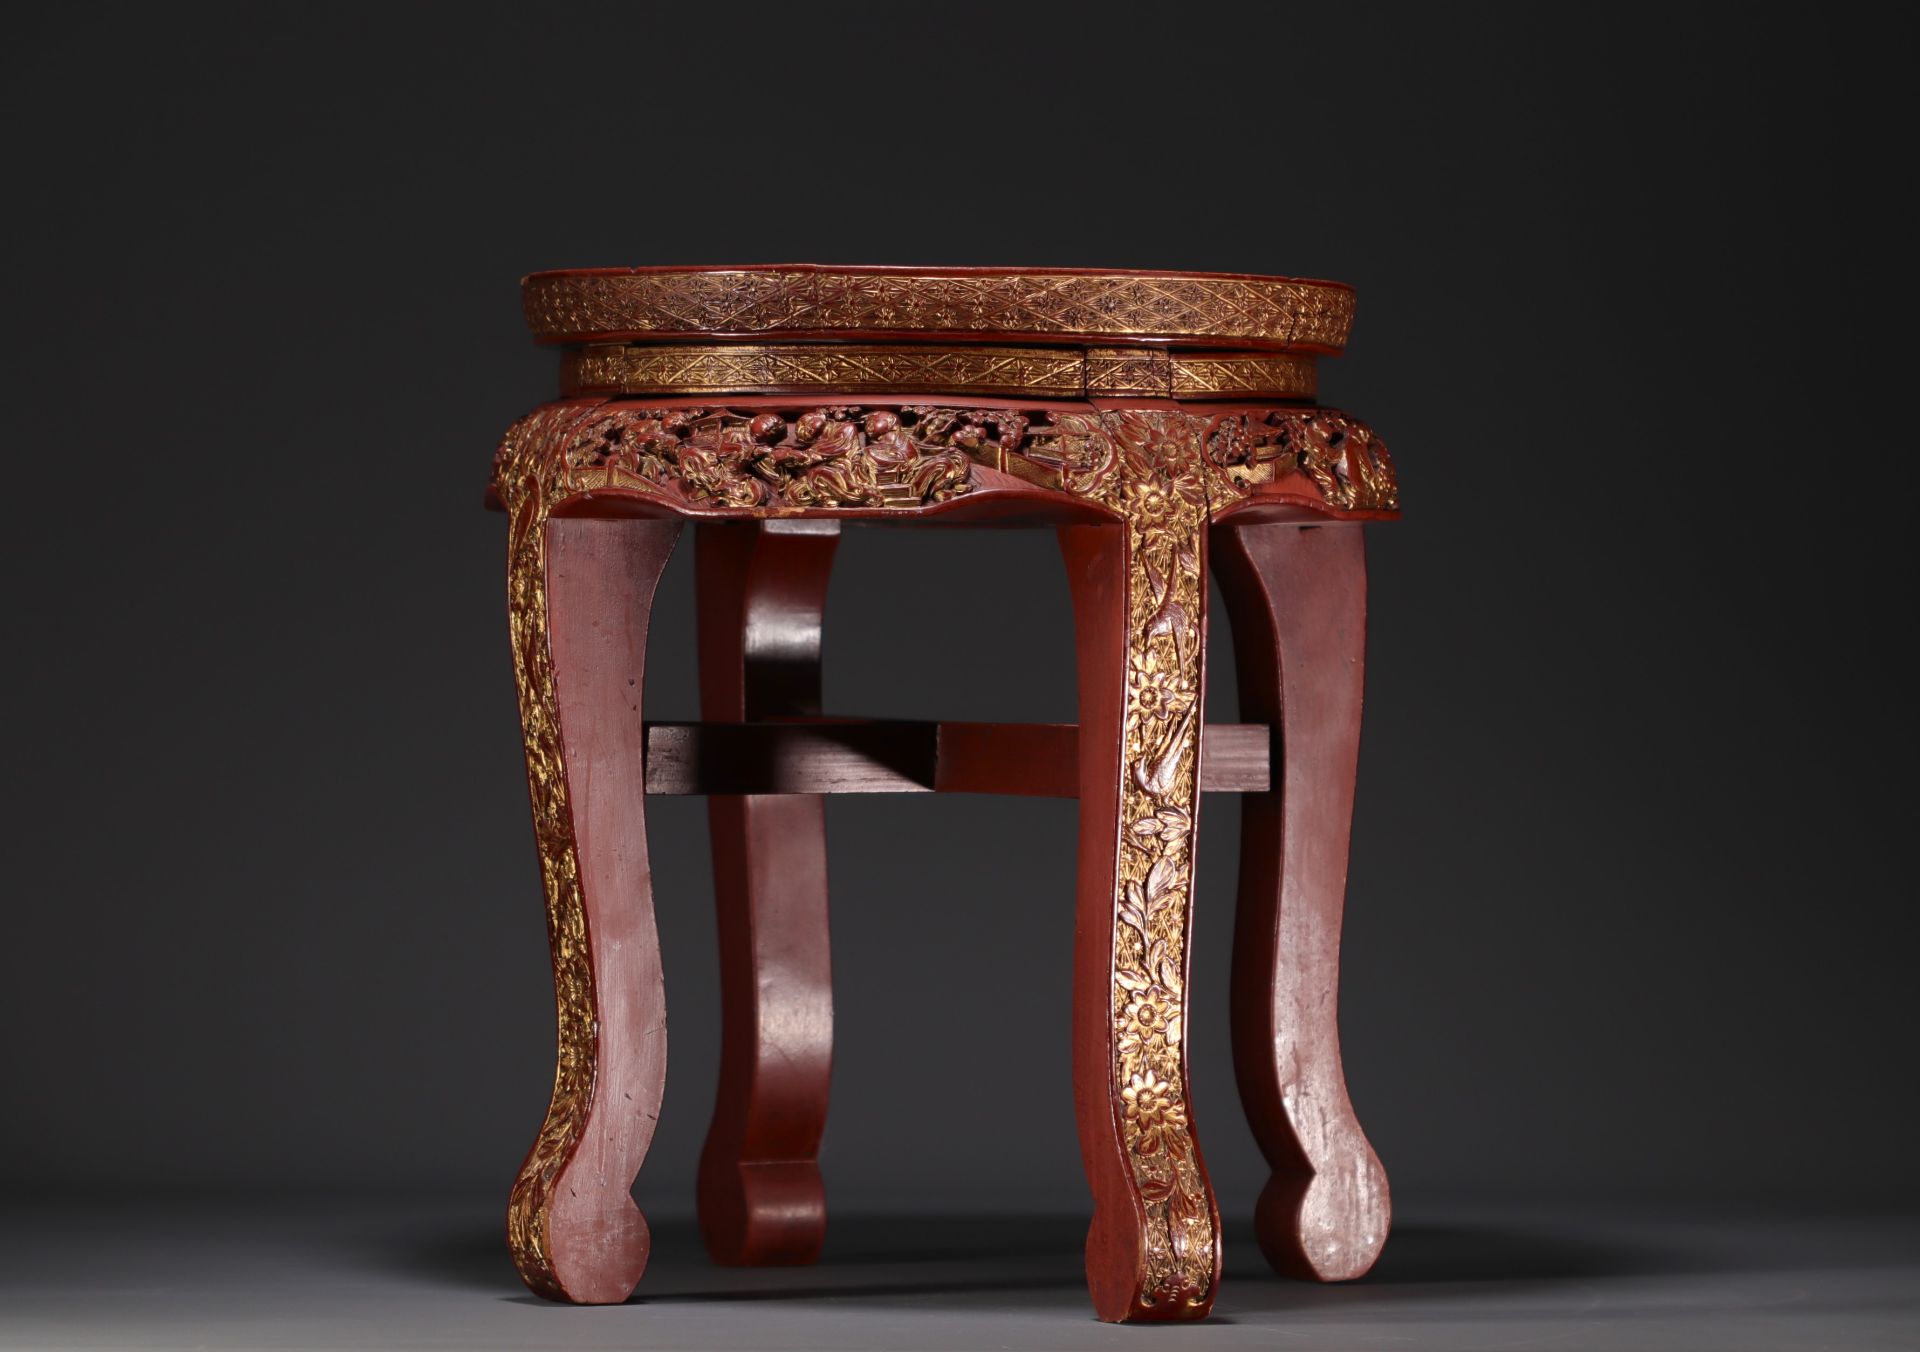 China - Small red and gold lacquer side table with carved figures and floral motifs, late 19th centu